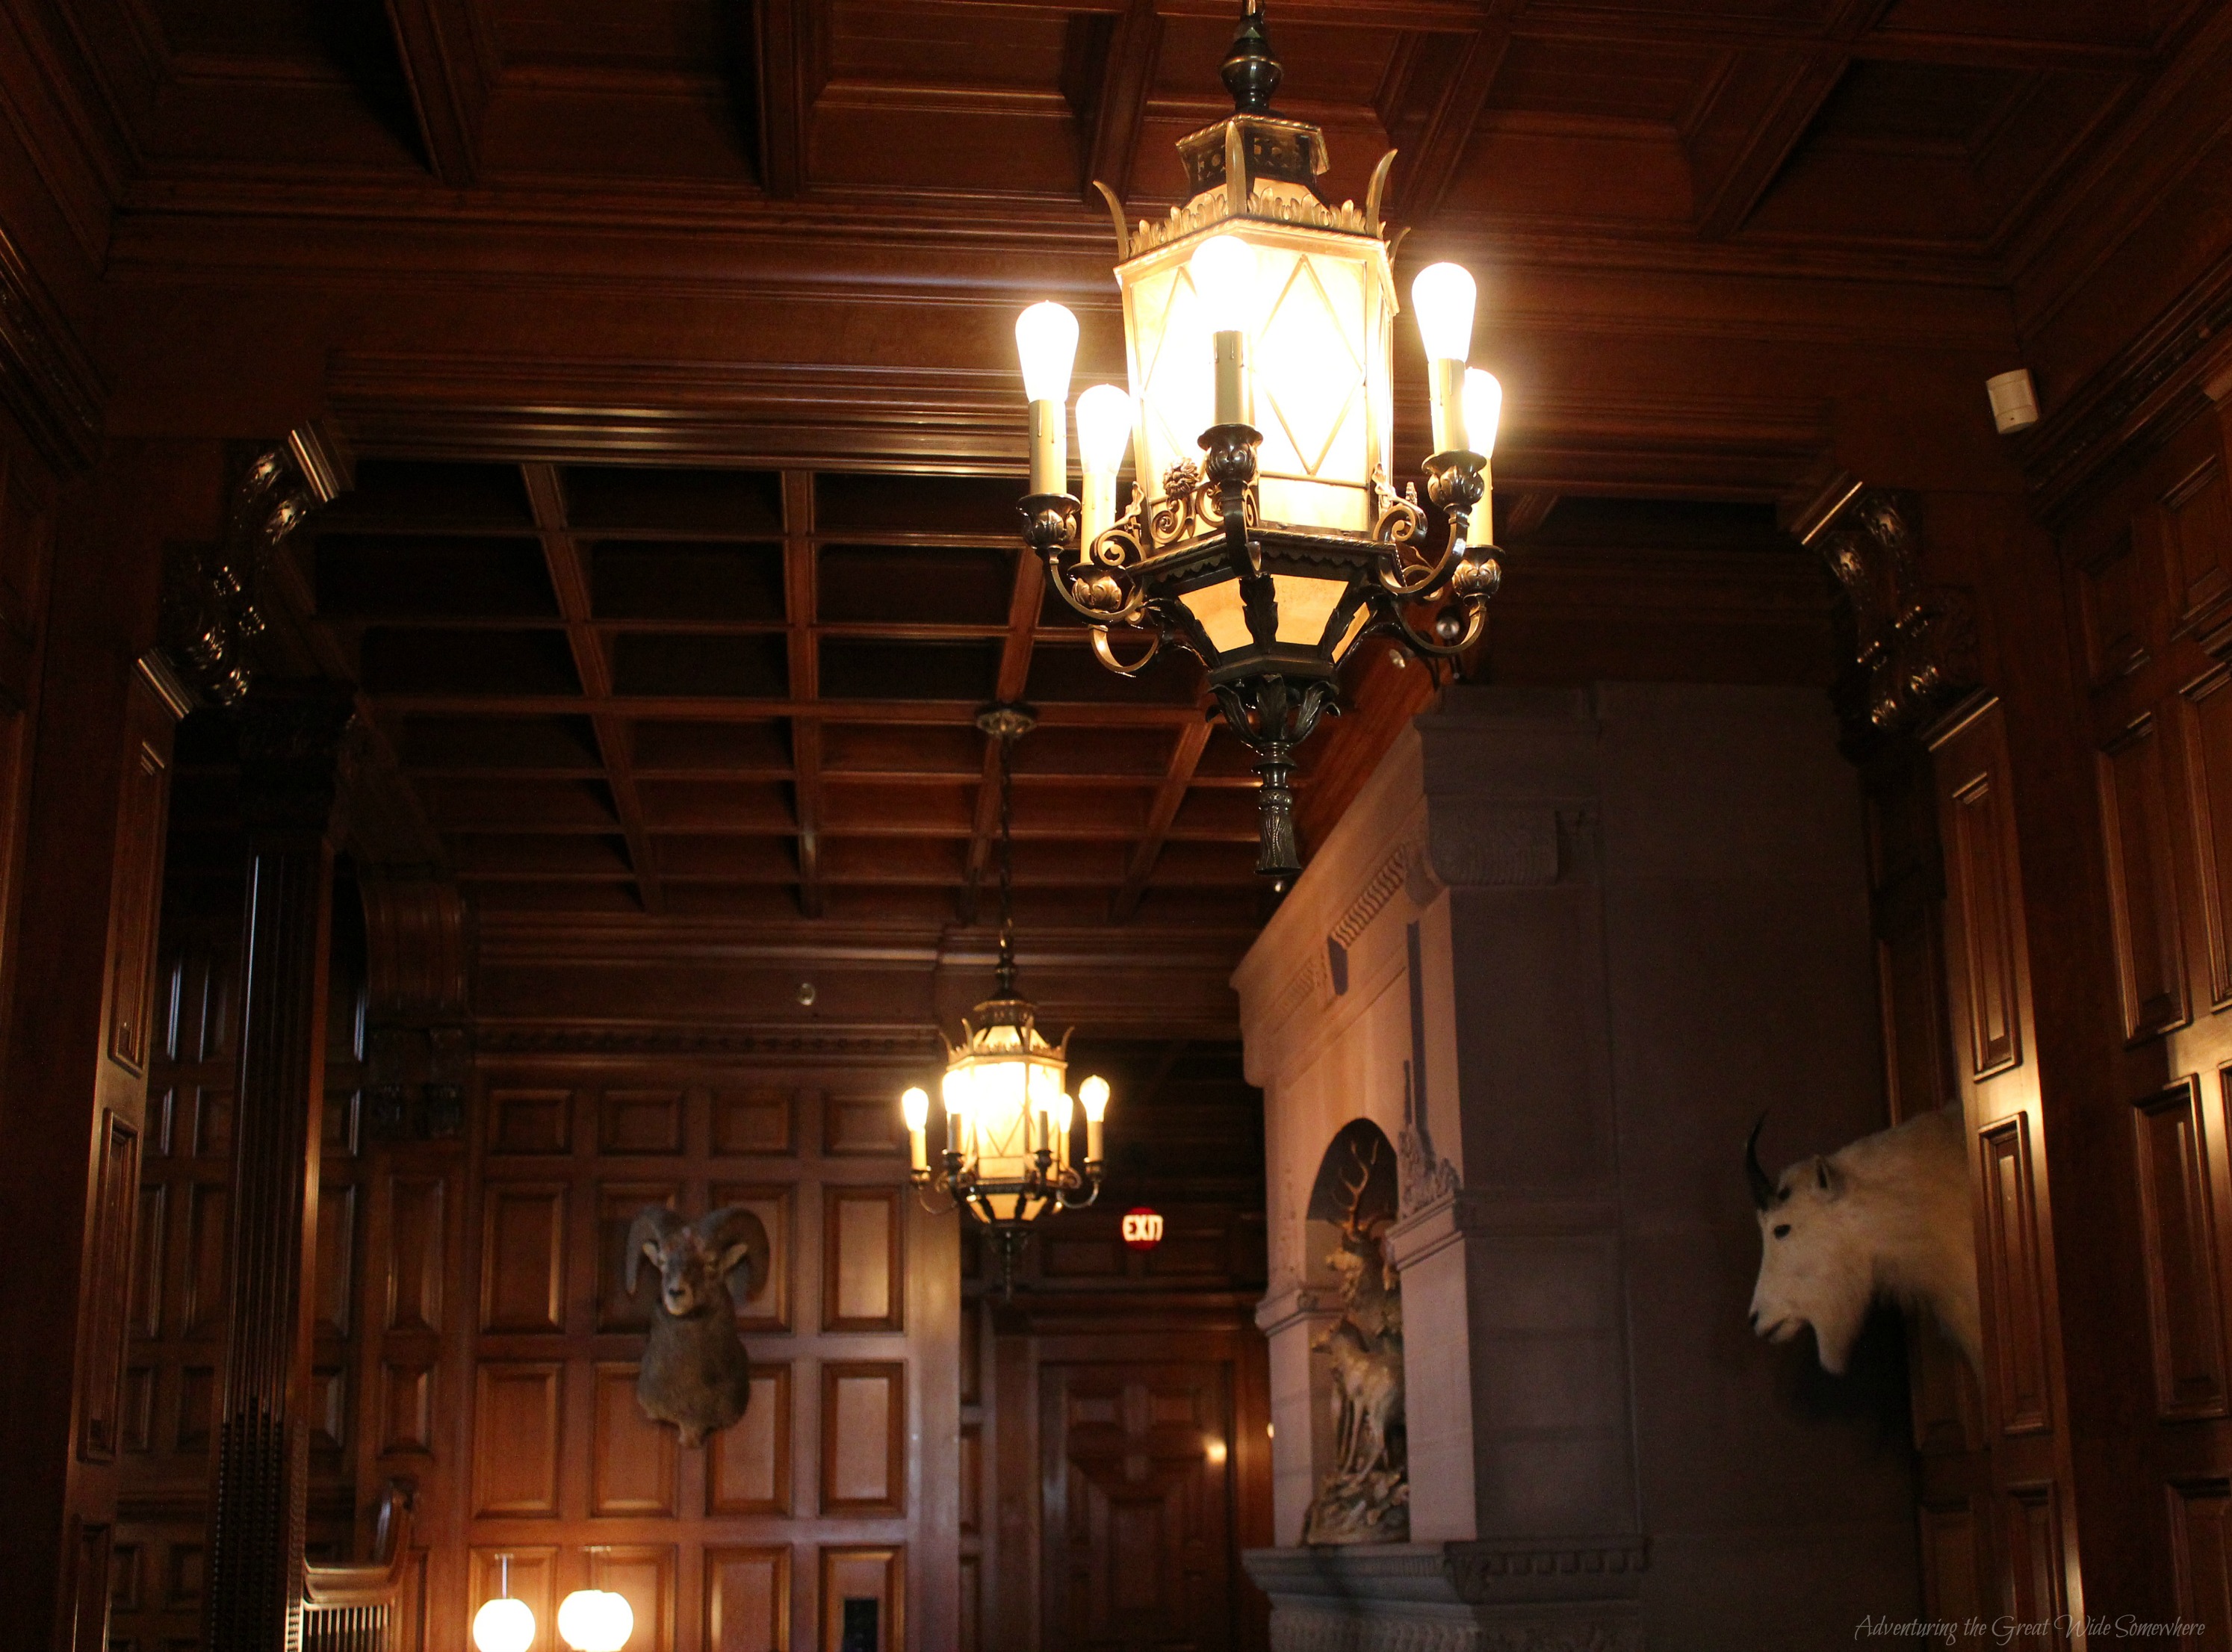 First Floor Entry to Craigdarroch Castle, Featuring Warm Wooden Walls and Intricate Paneling